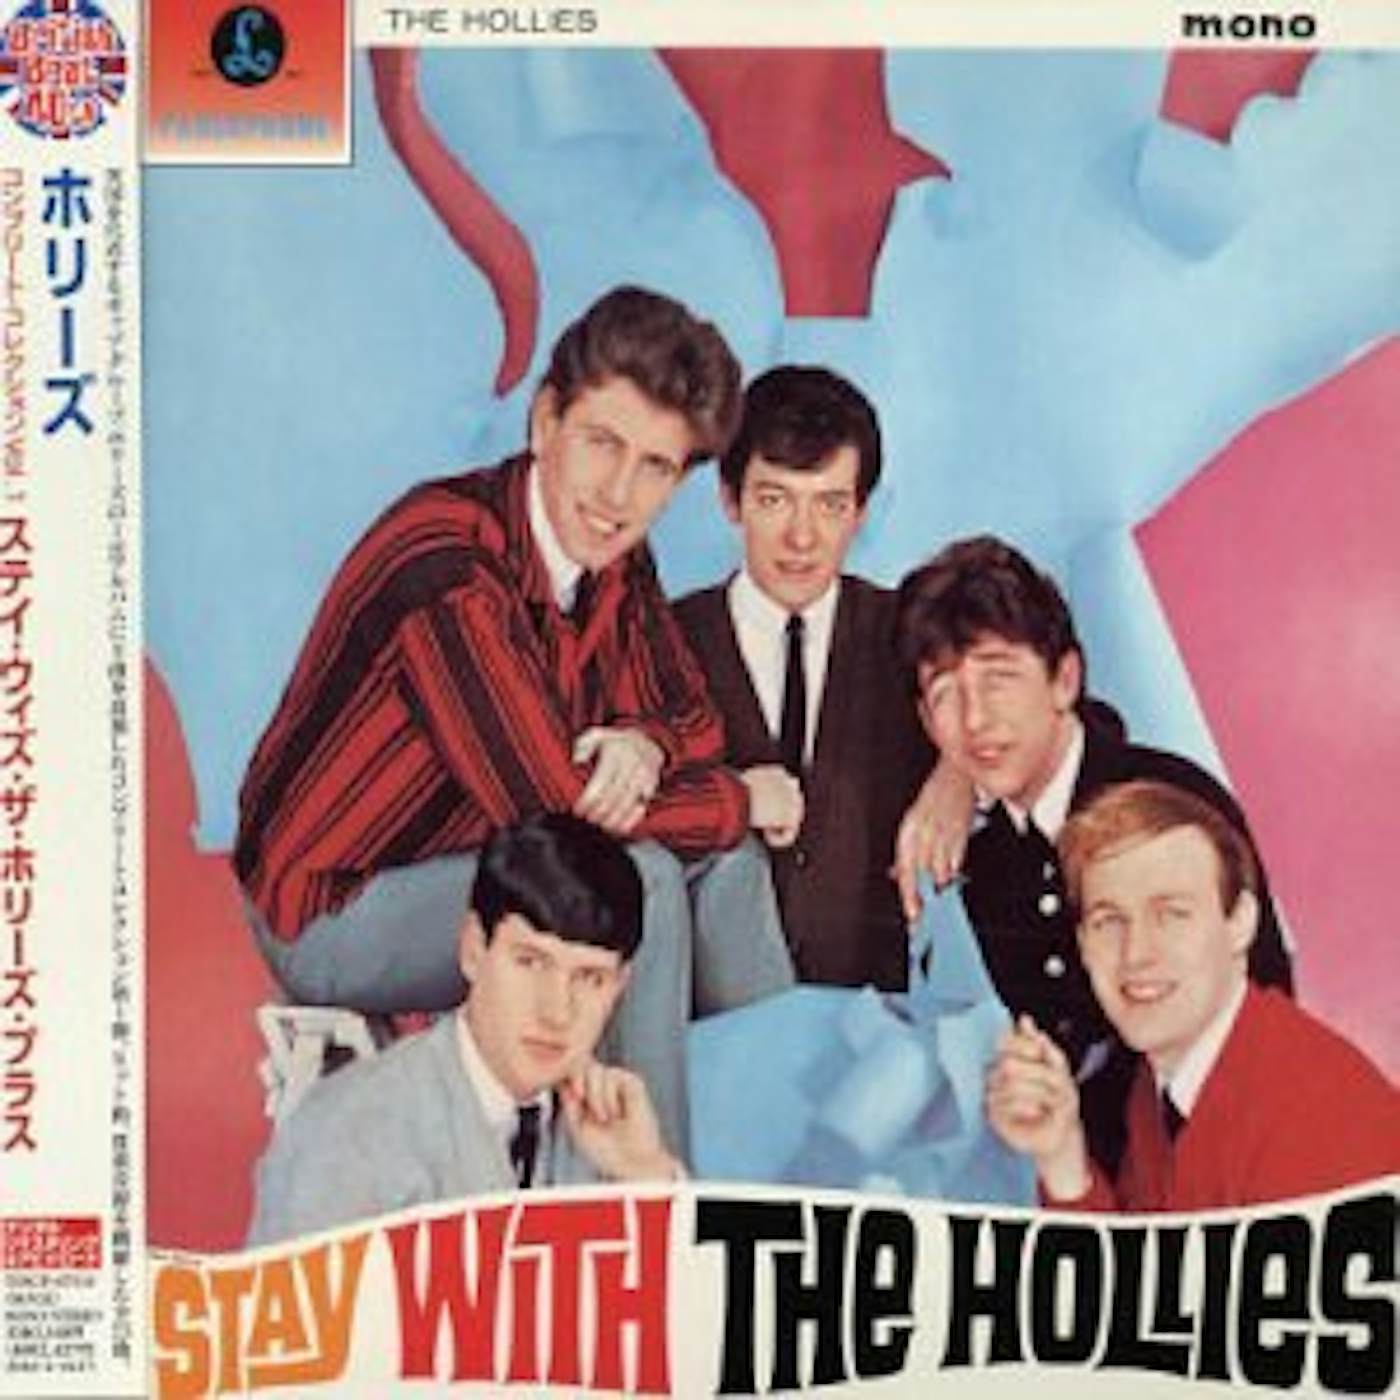 The Hollies STAY WITH PLUS CD